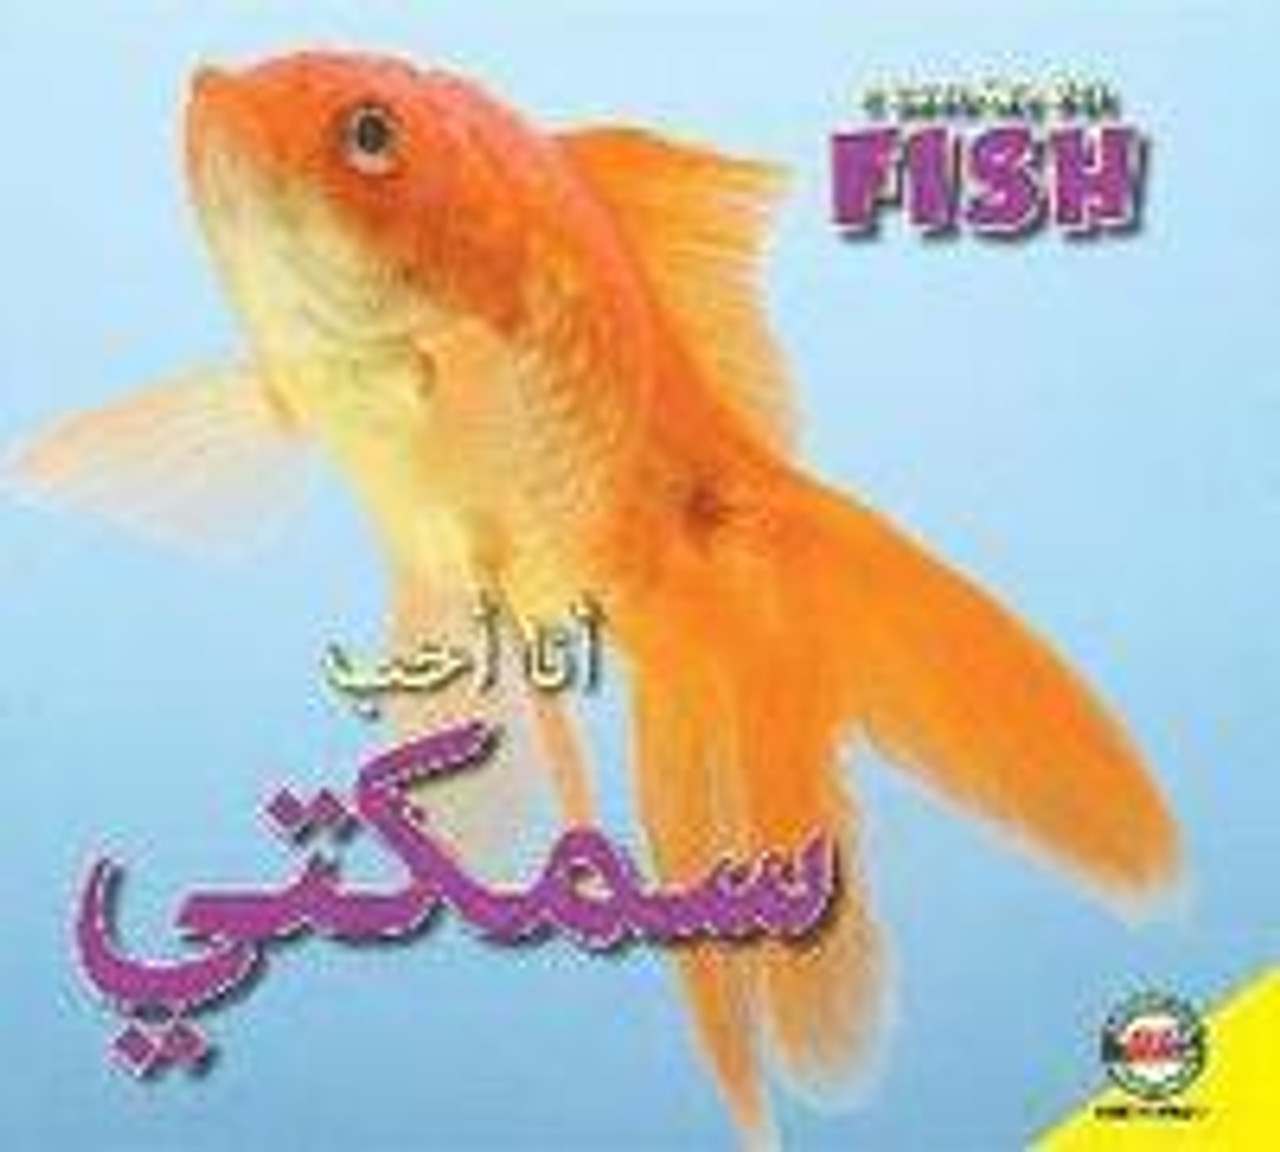 I Love My Pet fish (Arabic) by Aaron Carr